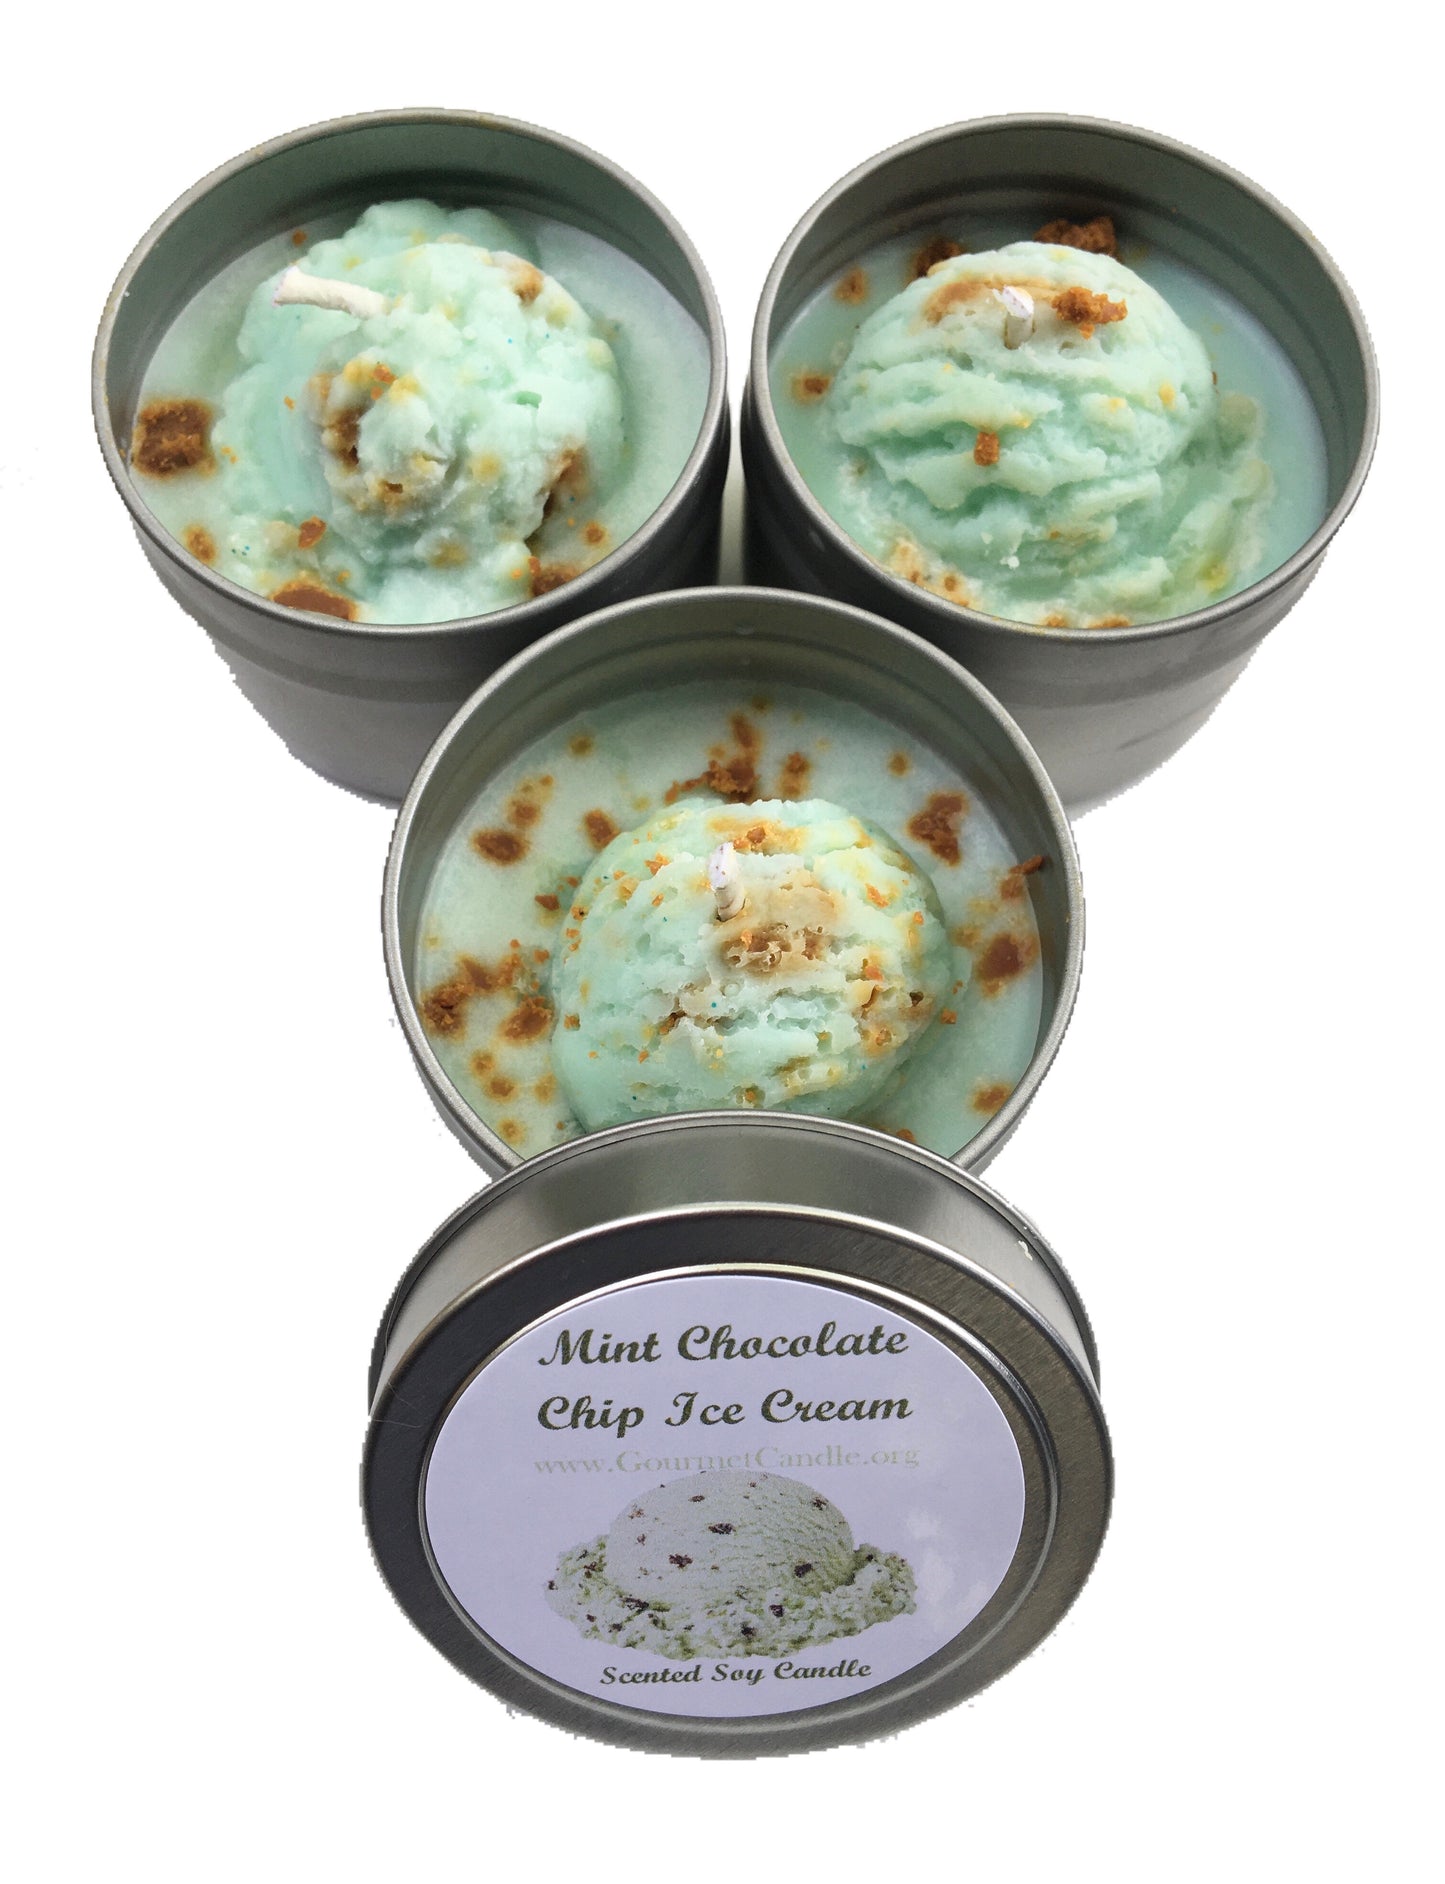 Mint Chocolate Chip Ice Cream Candle - NEW